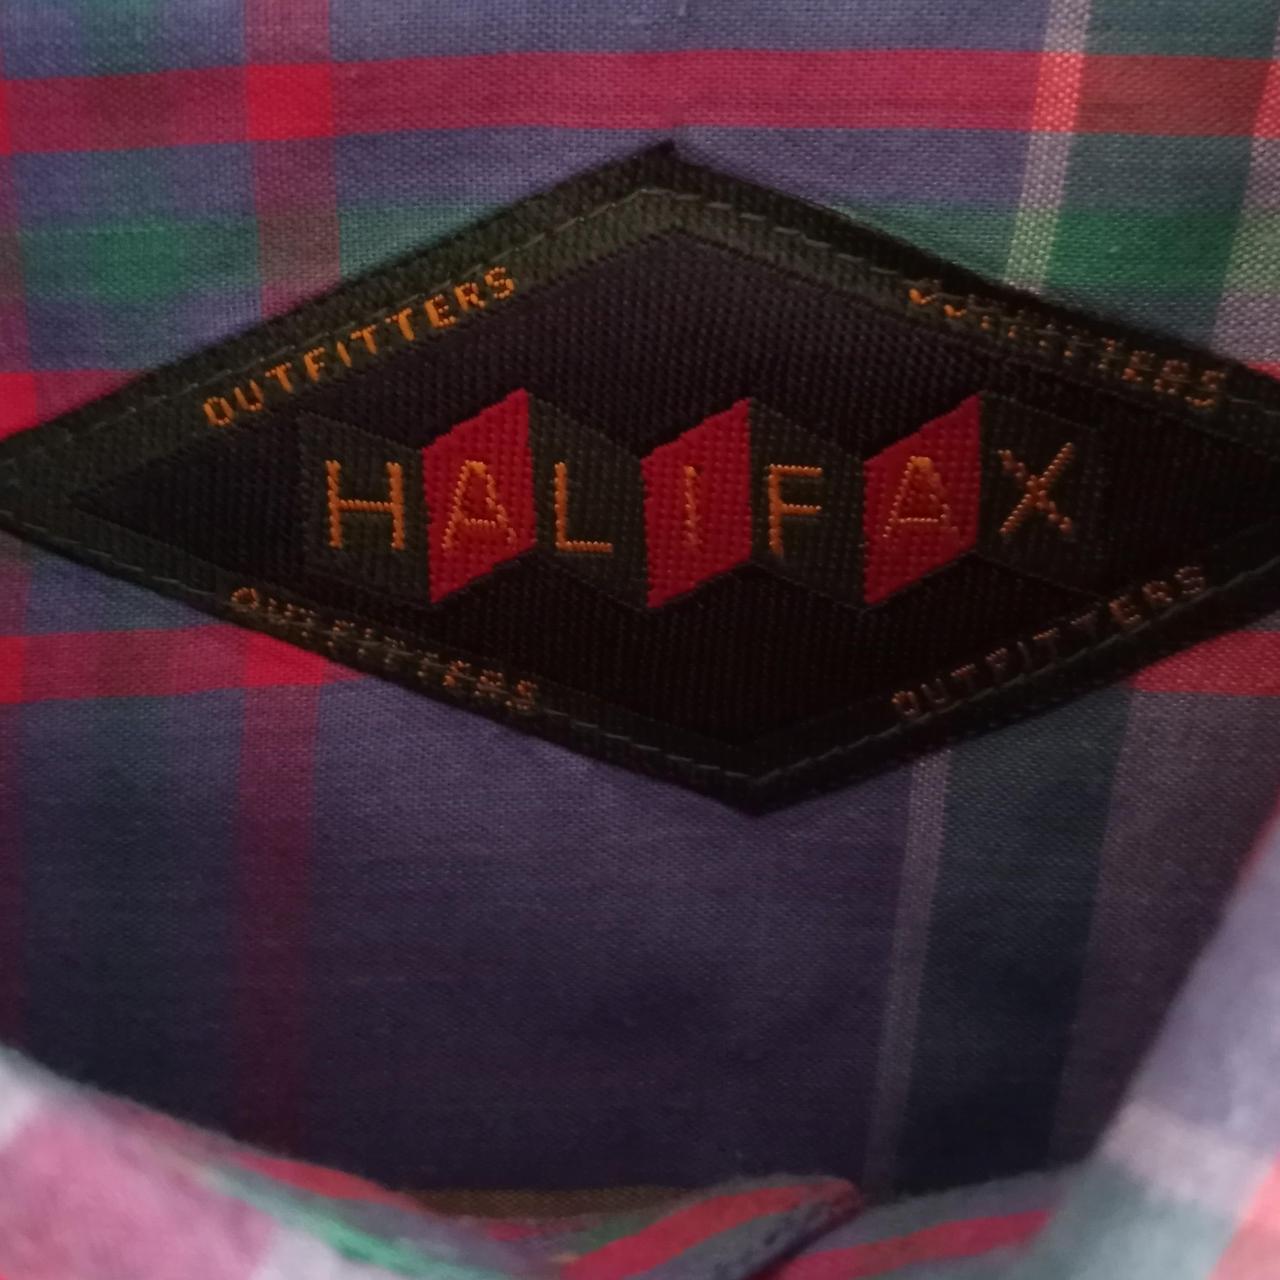 Product Image 2 - Halifax Outfitters Mens Shirt
Excellent condition